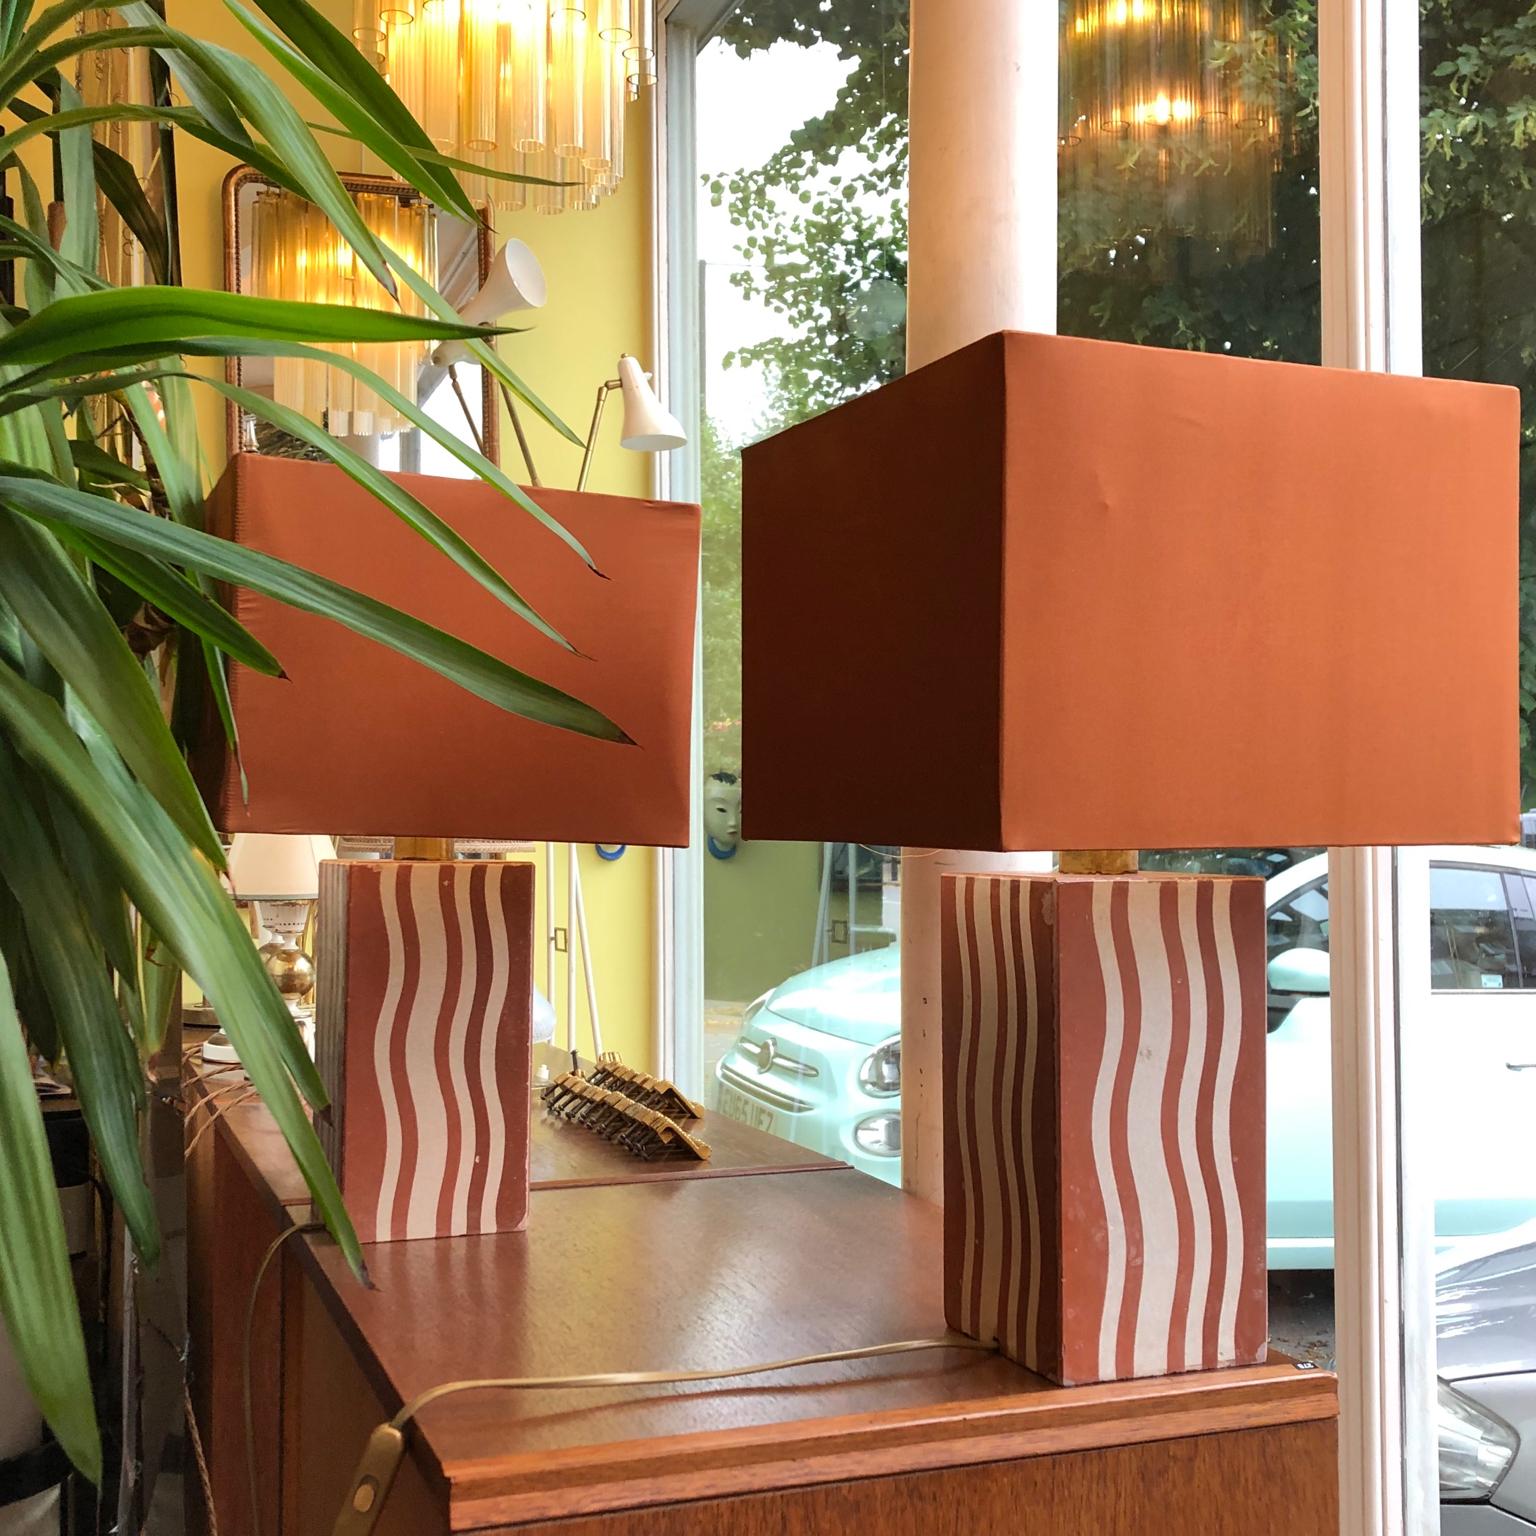 European Pair of Table Lamps with 1930s Reclaimed Art Deco Tiles, Off-White and Brick